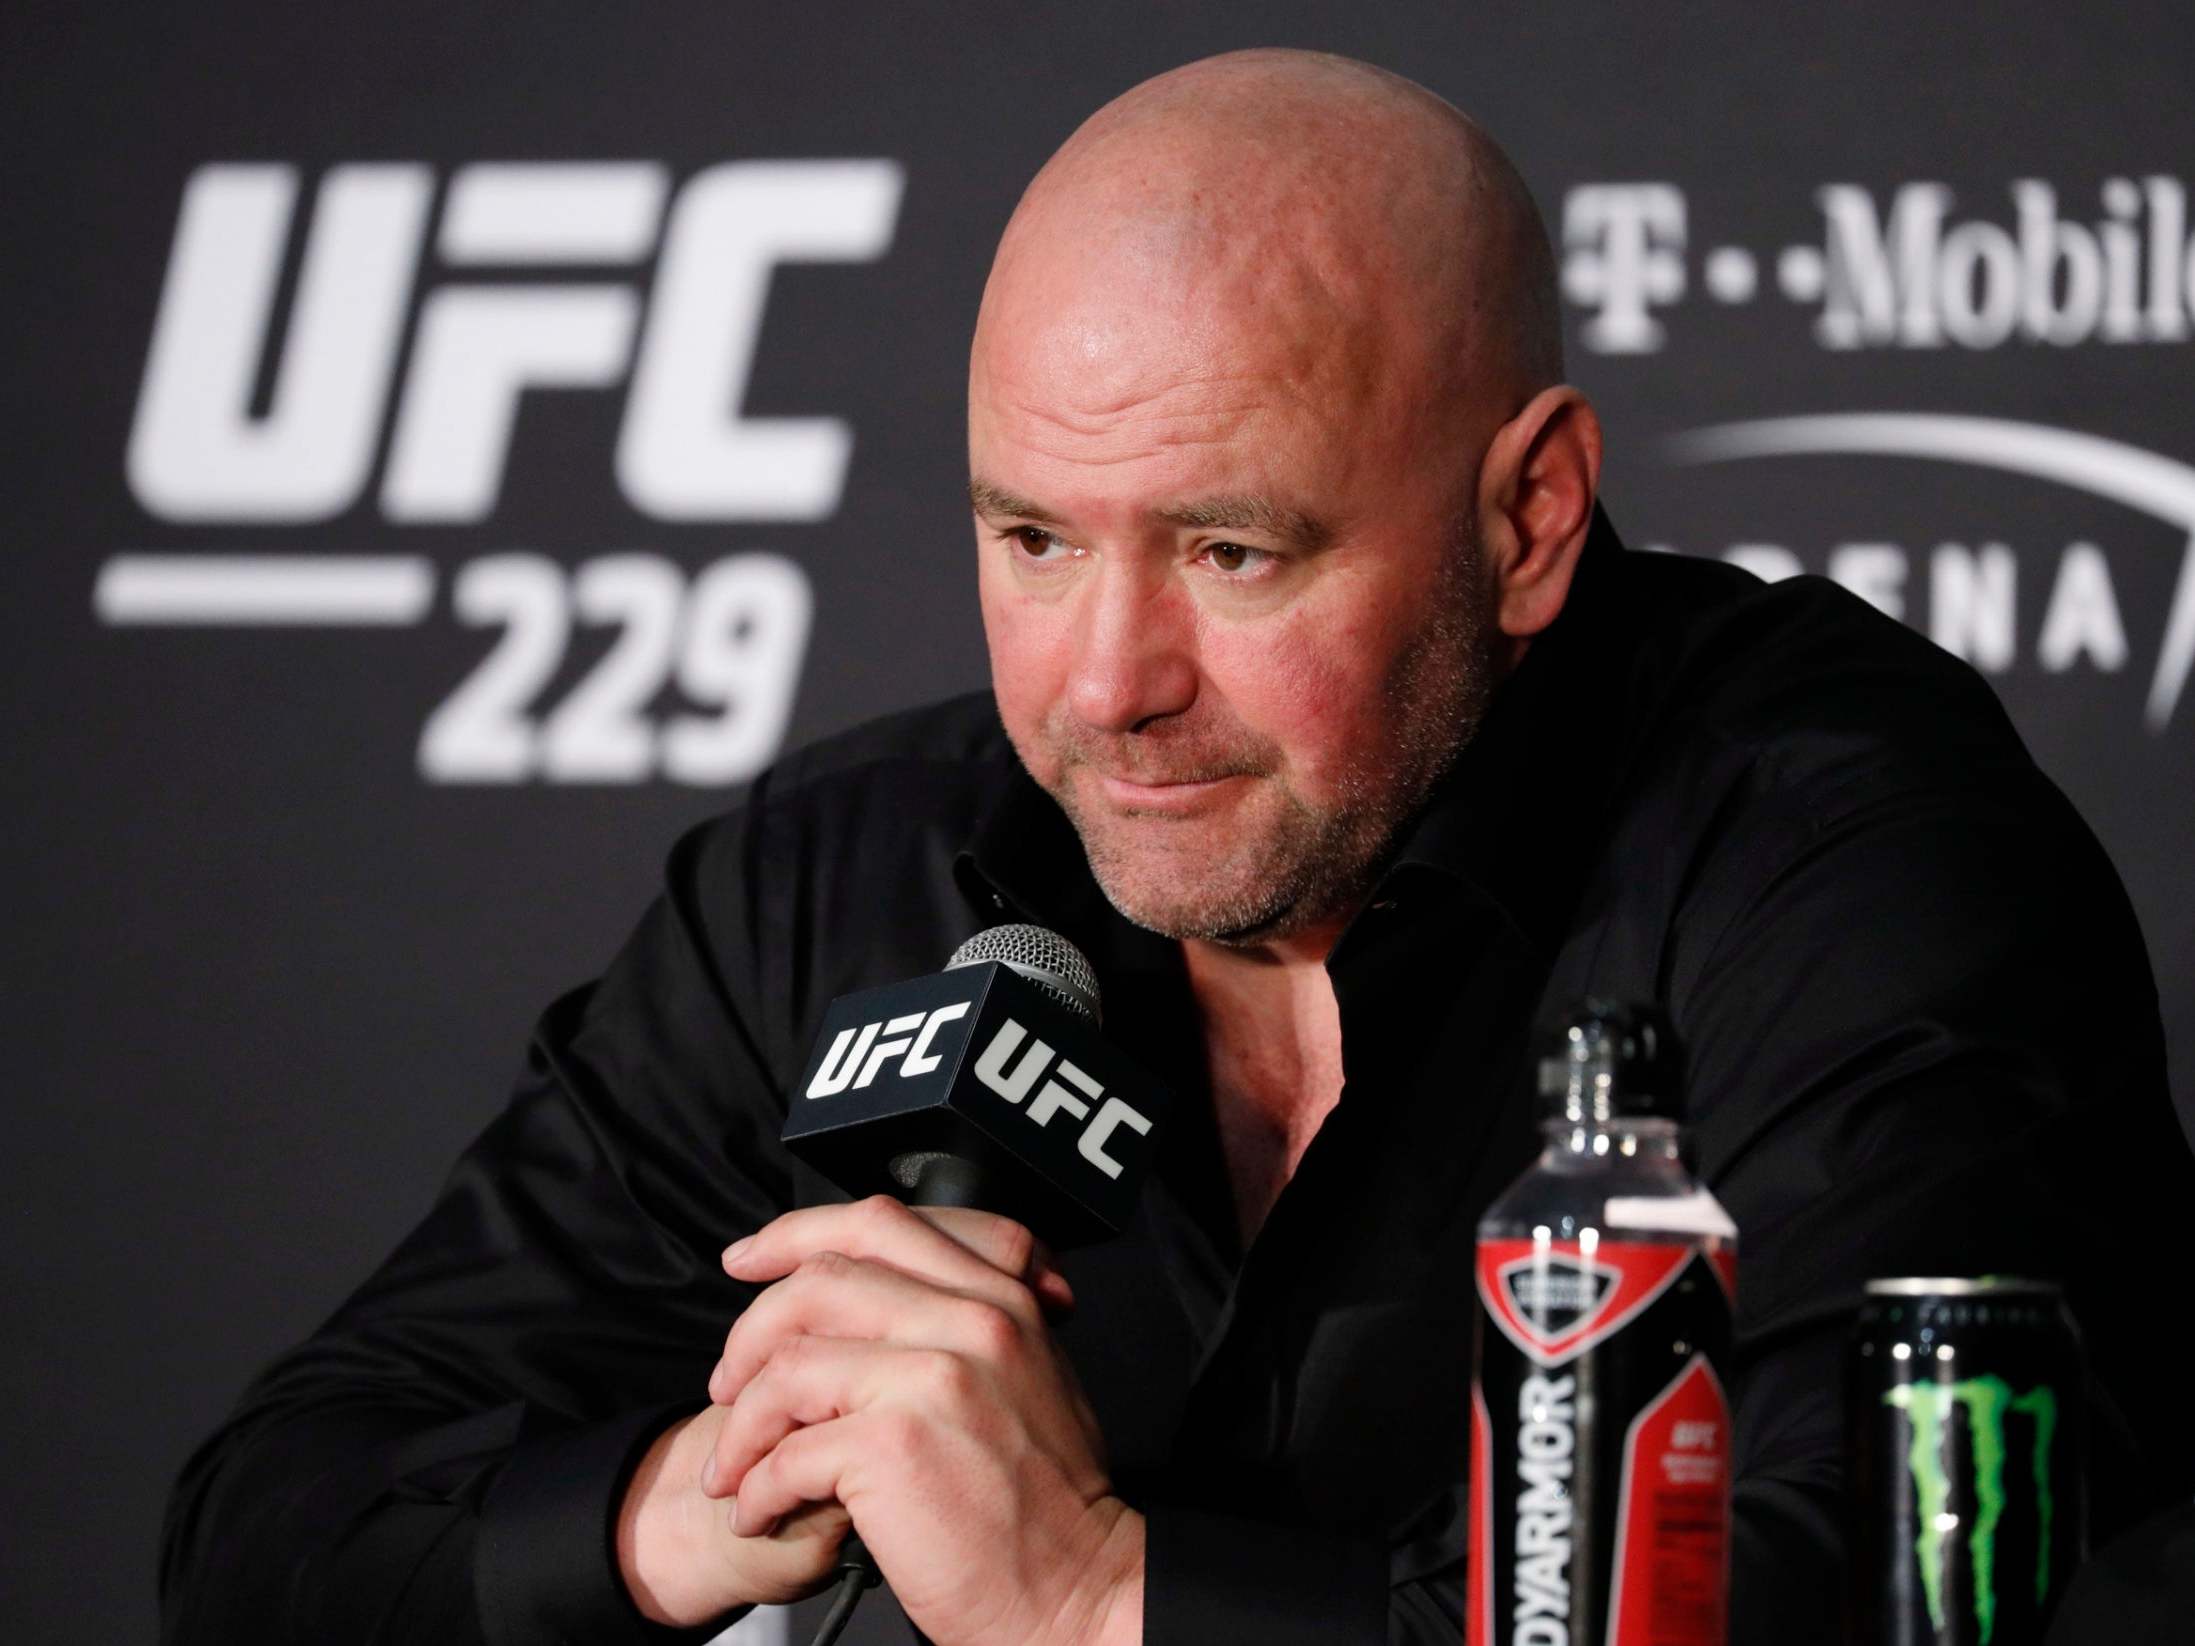 Dana White has moved the event to the United States